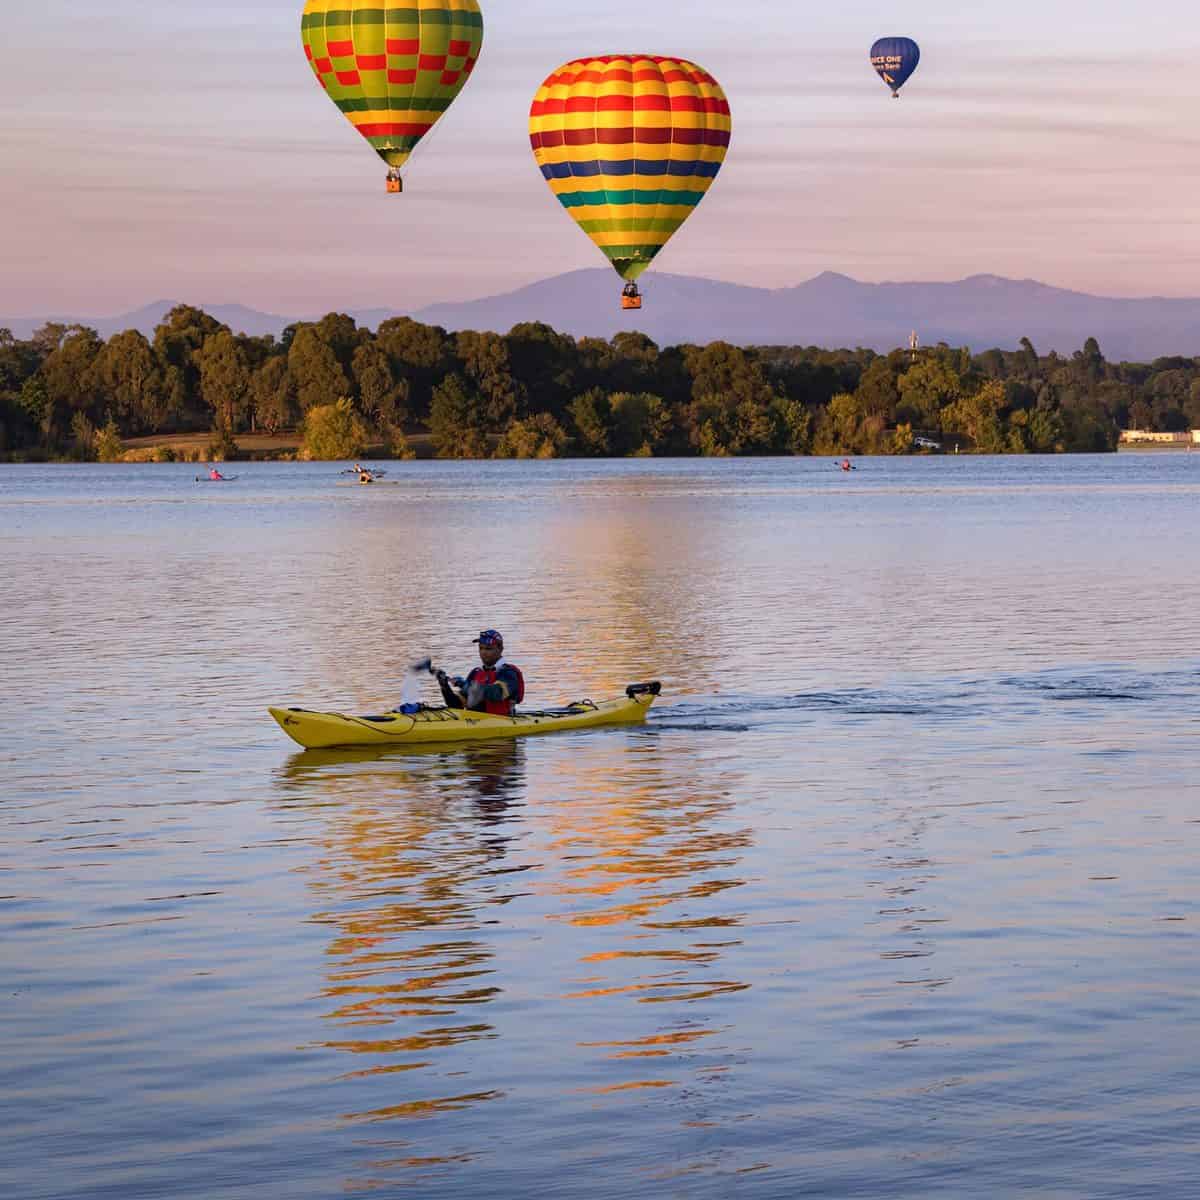 Hot air balloons over Canberra's lakes 